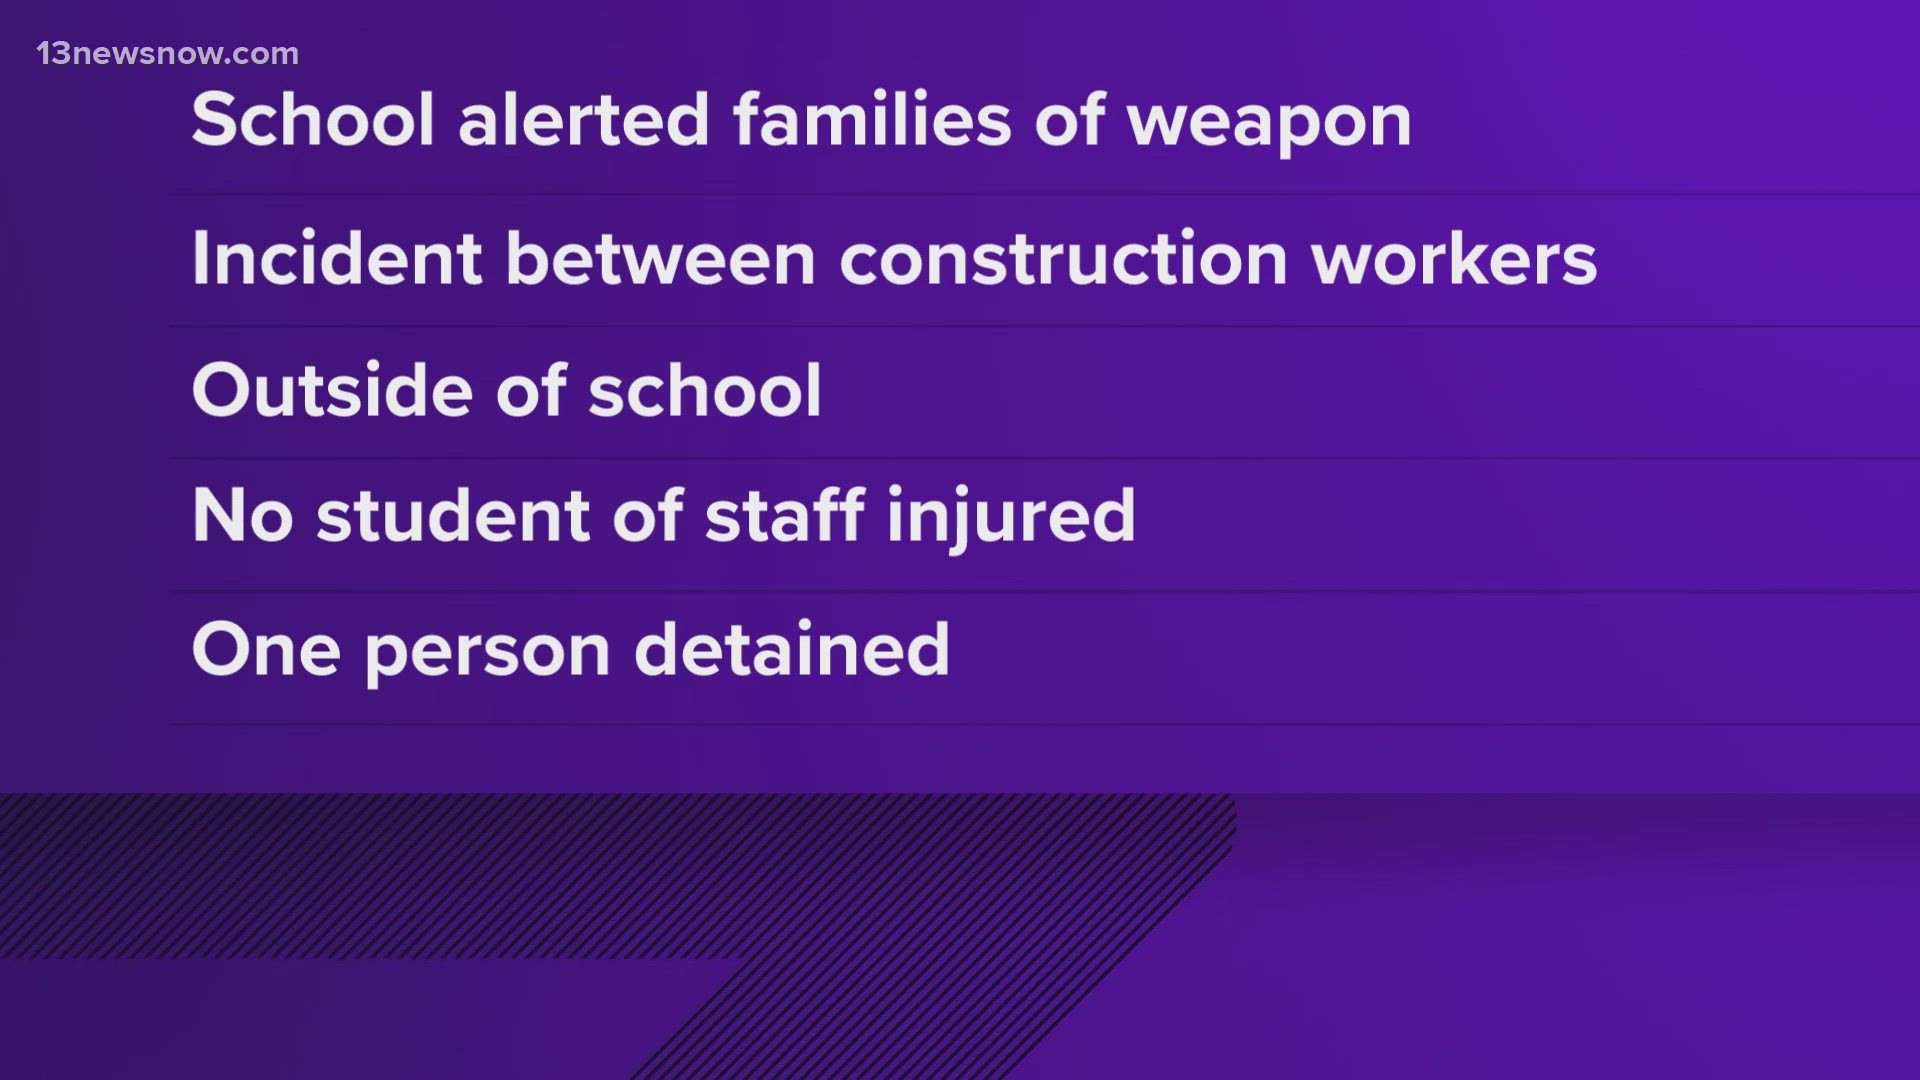 This morning the school alerted families about reports of a weapon on school grounds.